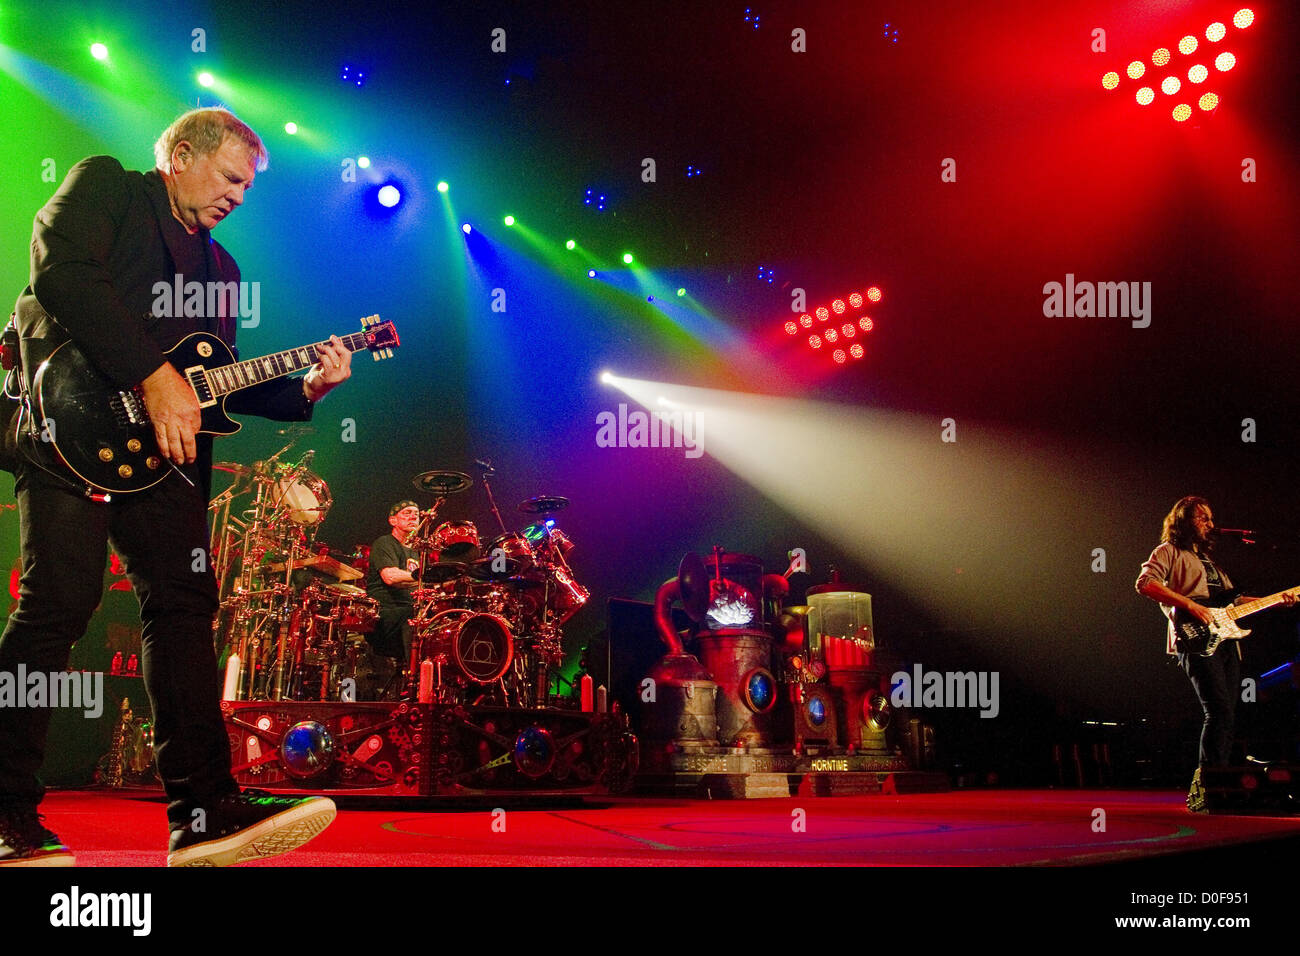 Nov. 21, 2012 - San Diego, CA, US - Prog-Rock legends RUSH performed at Valley View Casino Center in San Diego on November 21, 2012. Pictured: ALEX LIFESON, GEDDY LEE, NEIL PEART. (Credit Image: © Daniel Knighton/ZUMAPRESS.com) Stock Photo